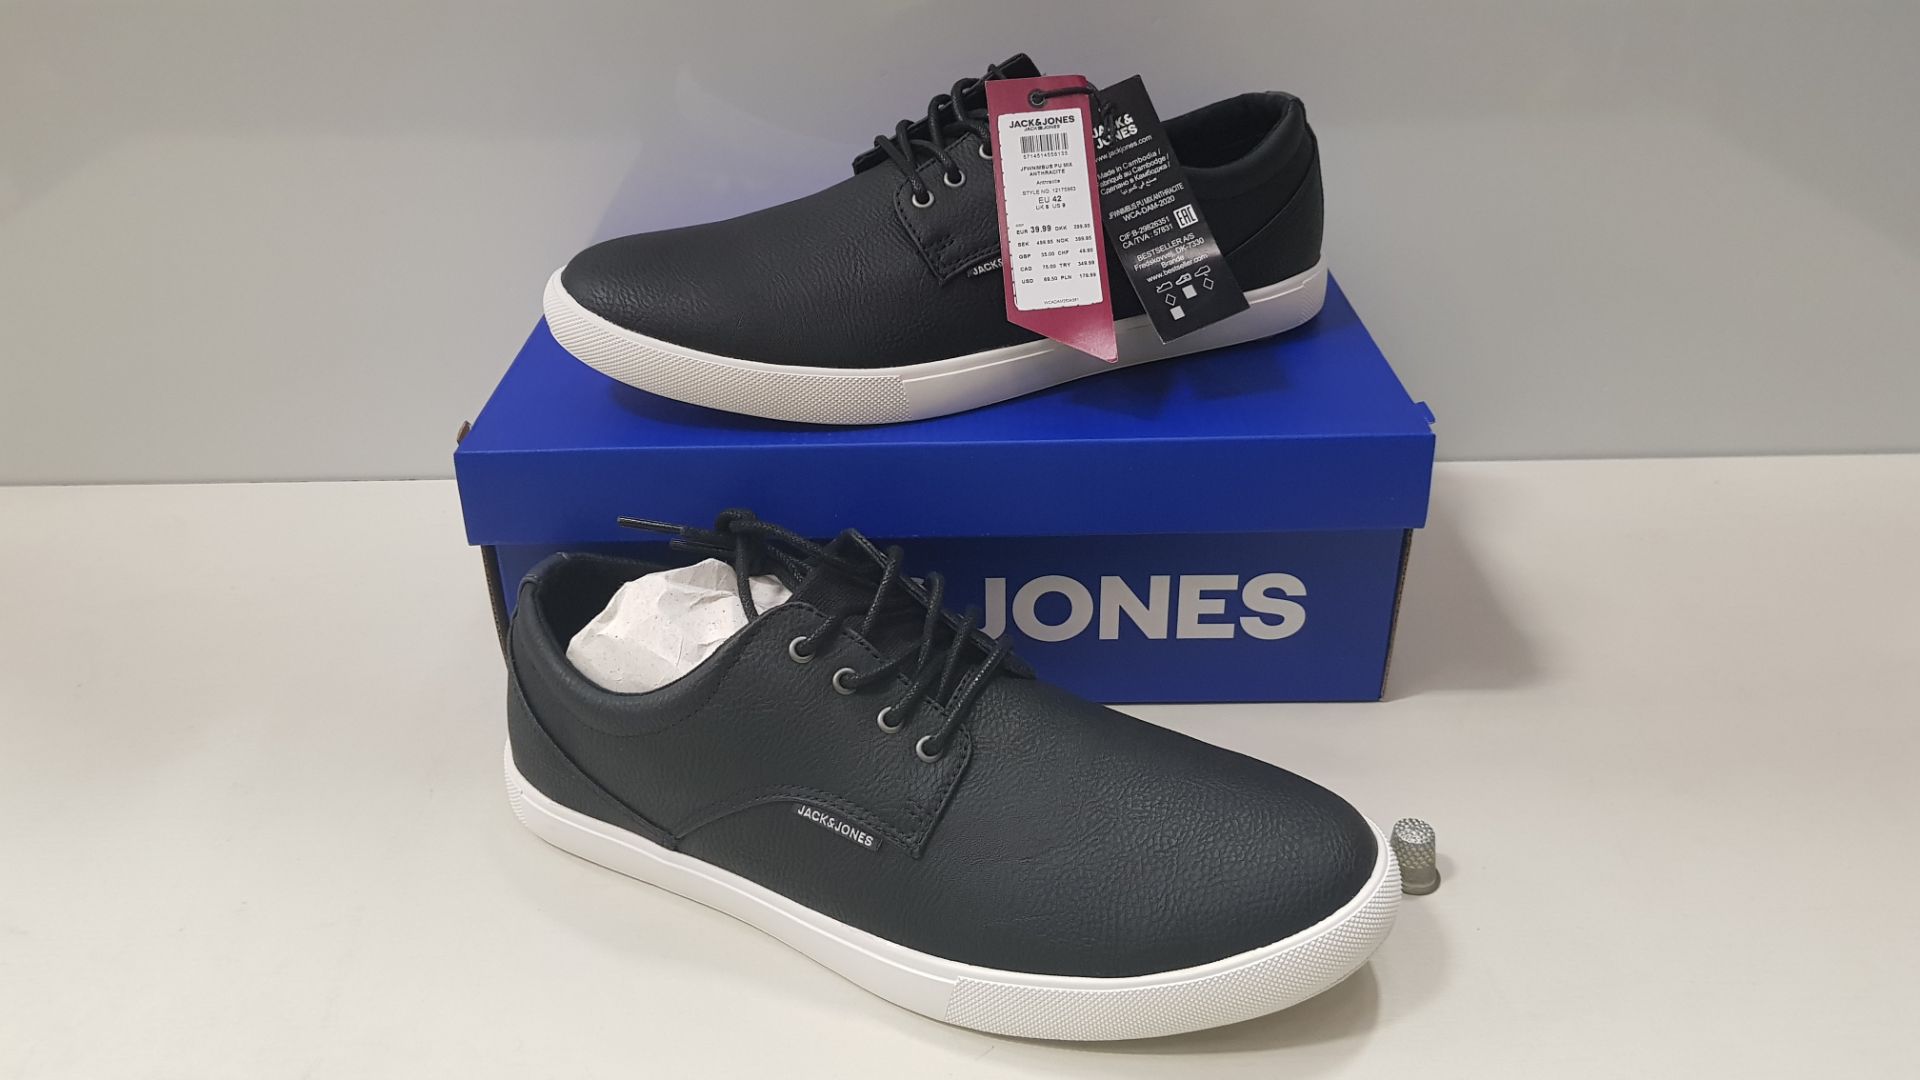 7 X BRAND NEW JACK & JONES ANTHRACITE TRAINERS UK SIZE 10 RRP £35.00 (TOTAL RRP £245.00) (PICK